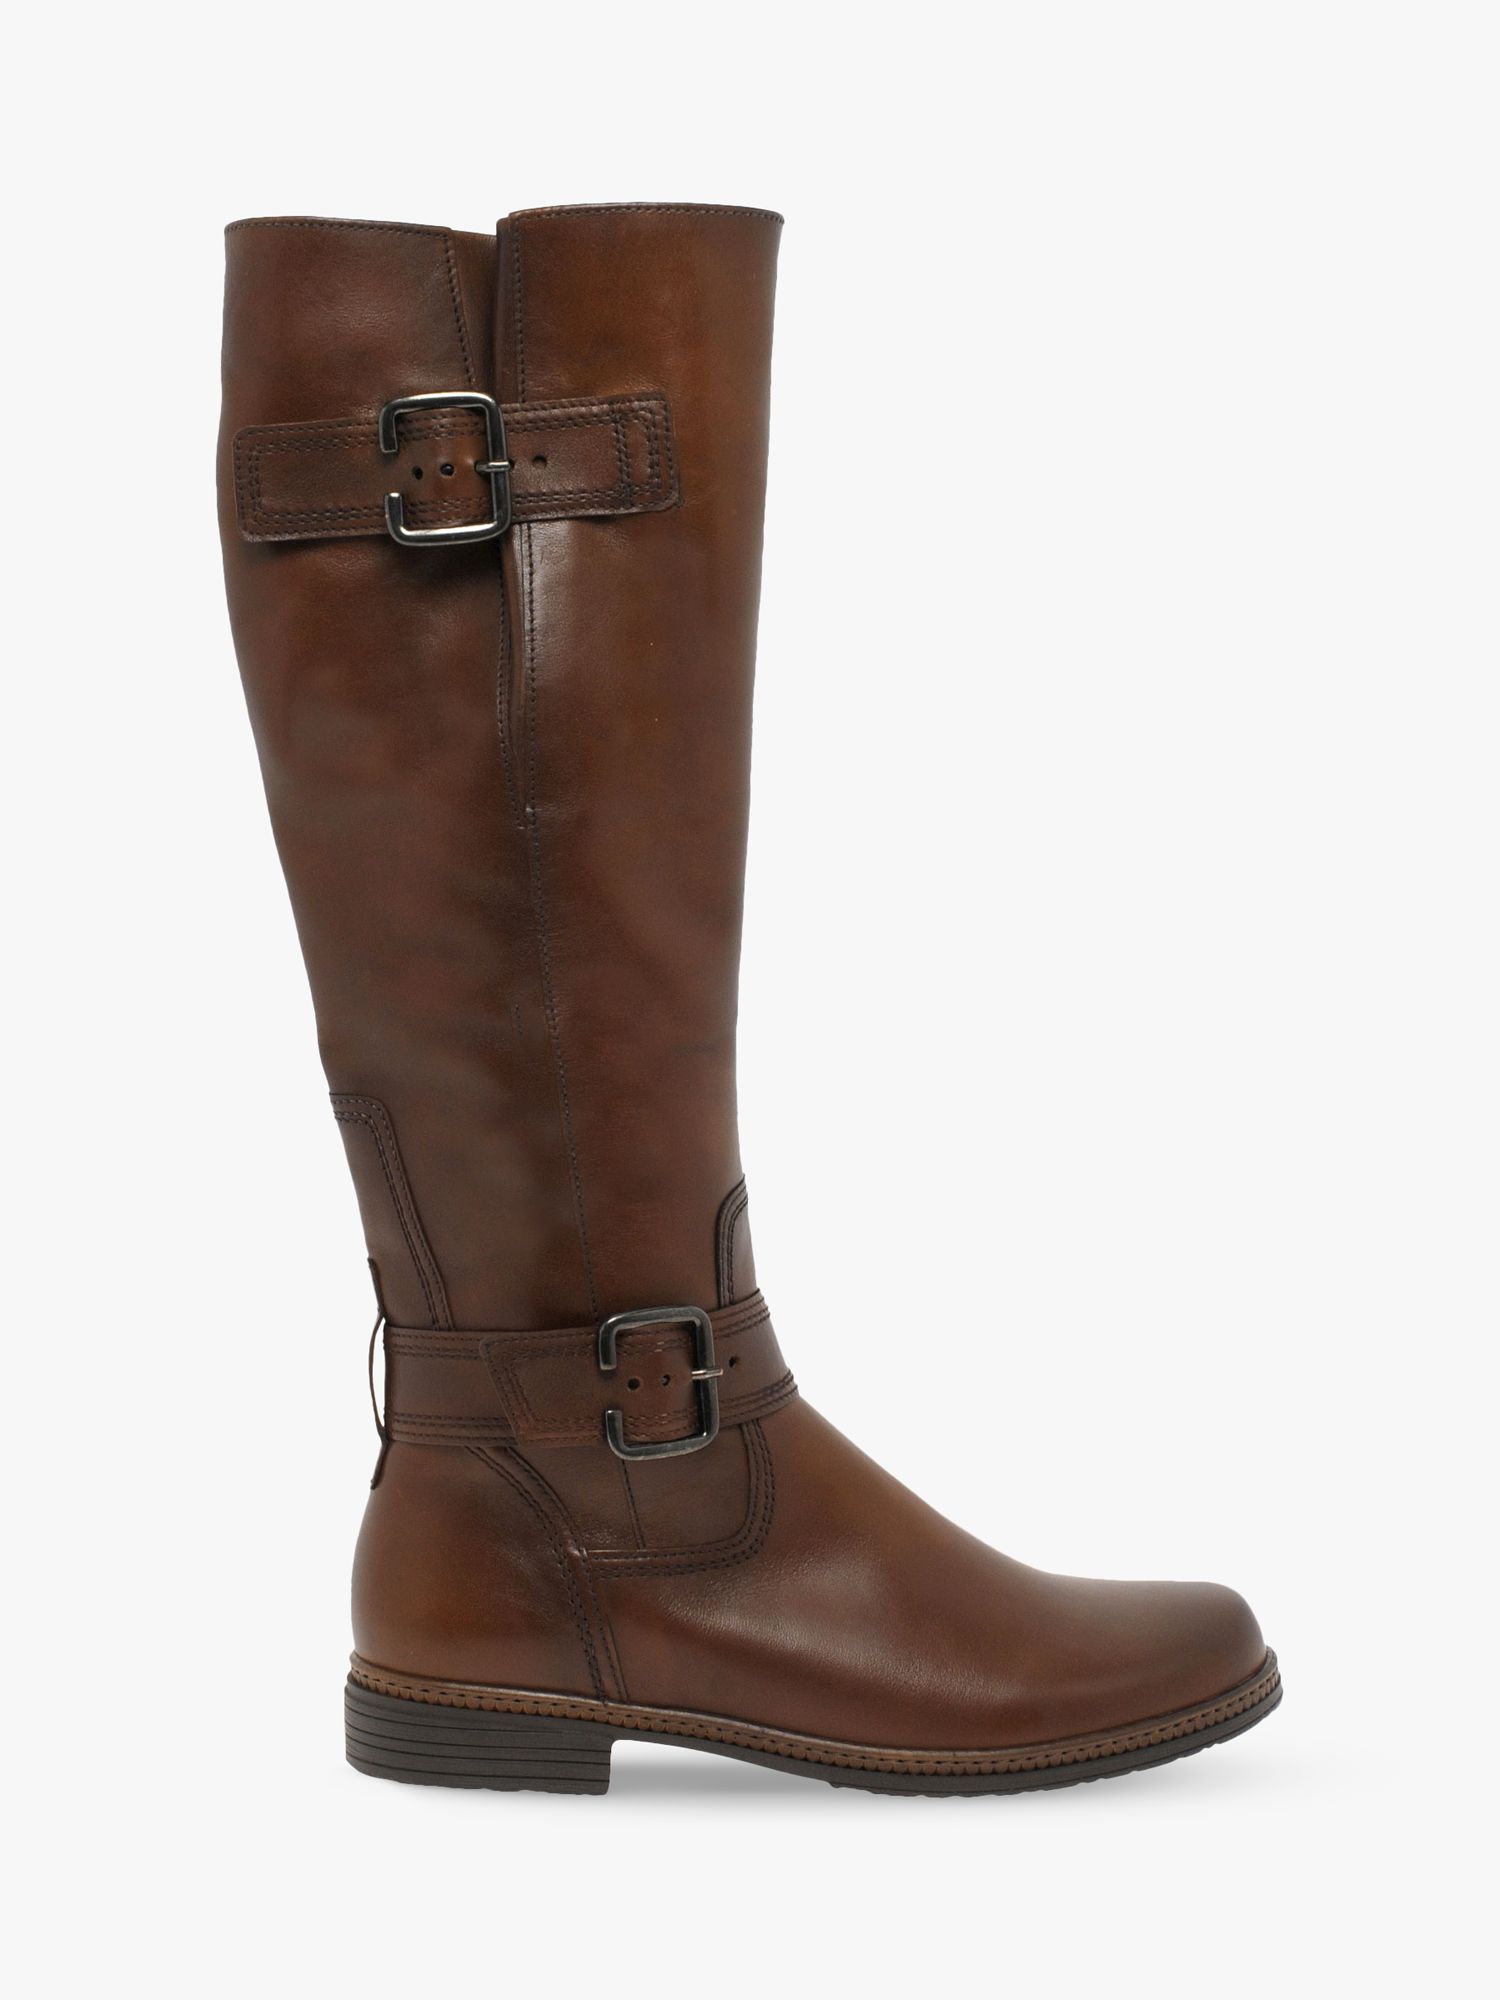 Gabor Nevada Leather Buckle Detail Knee High Boots, Tan at John Lewis ...